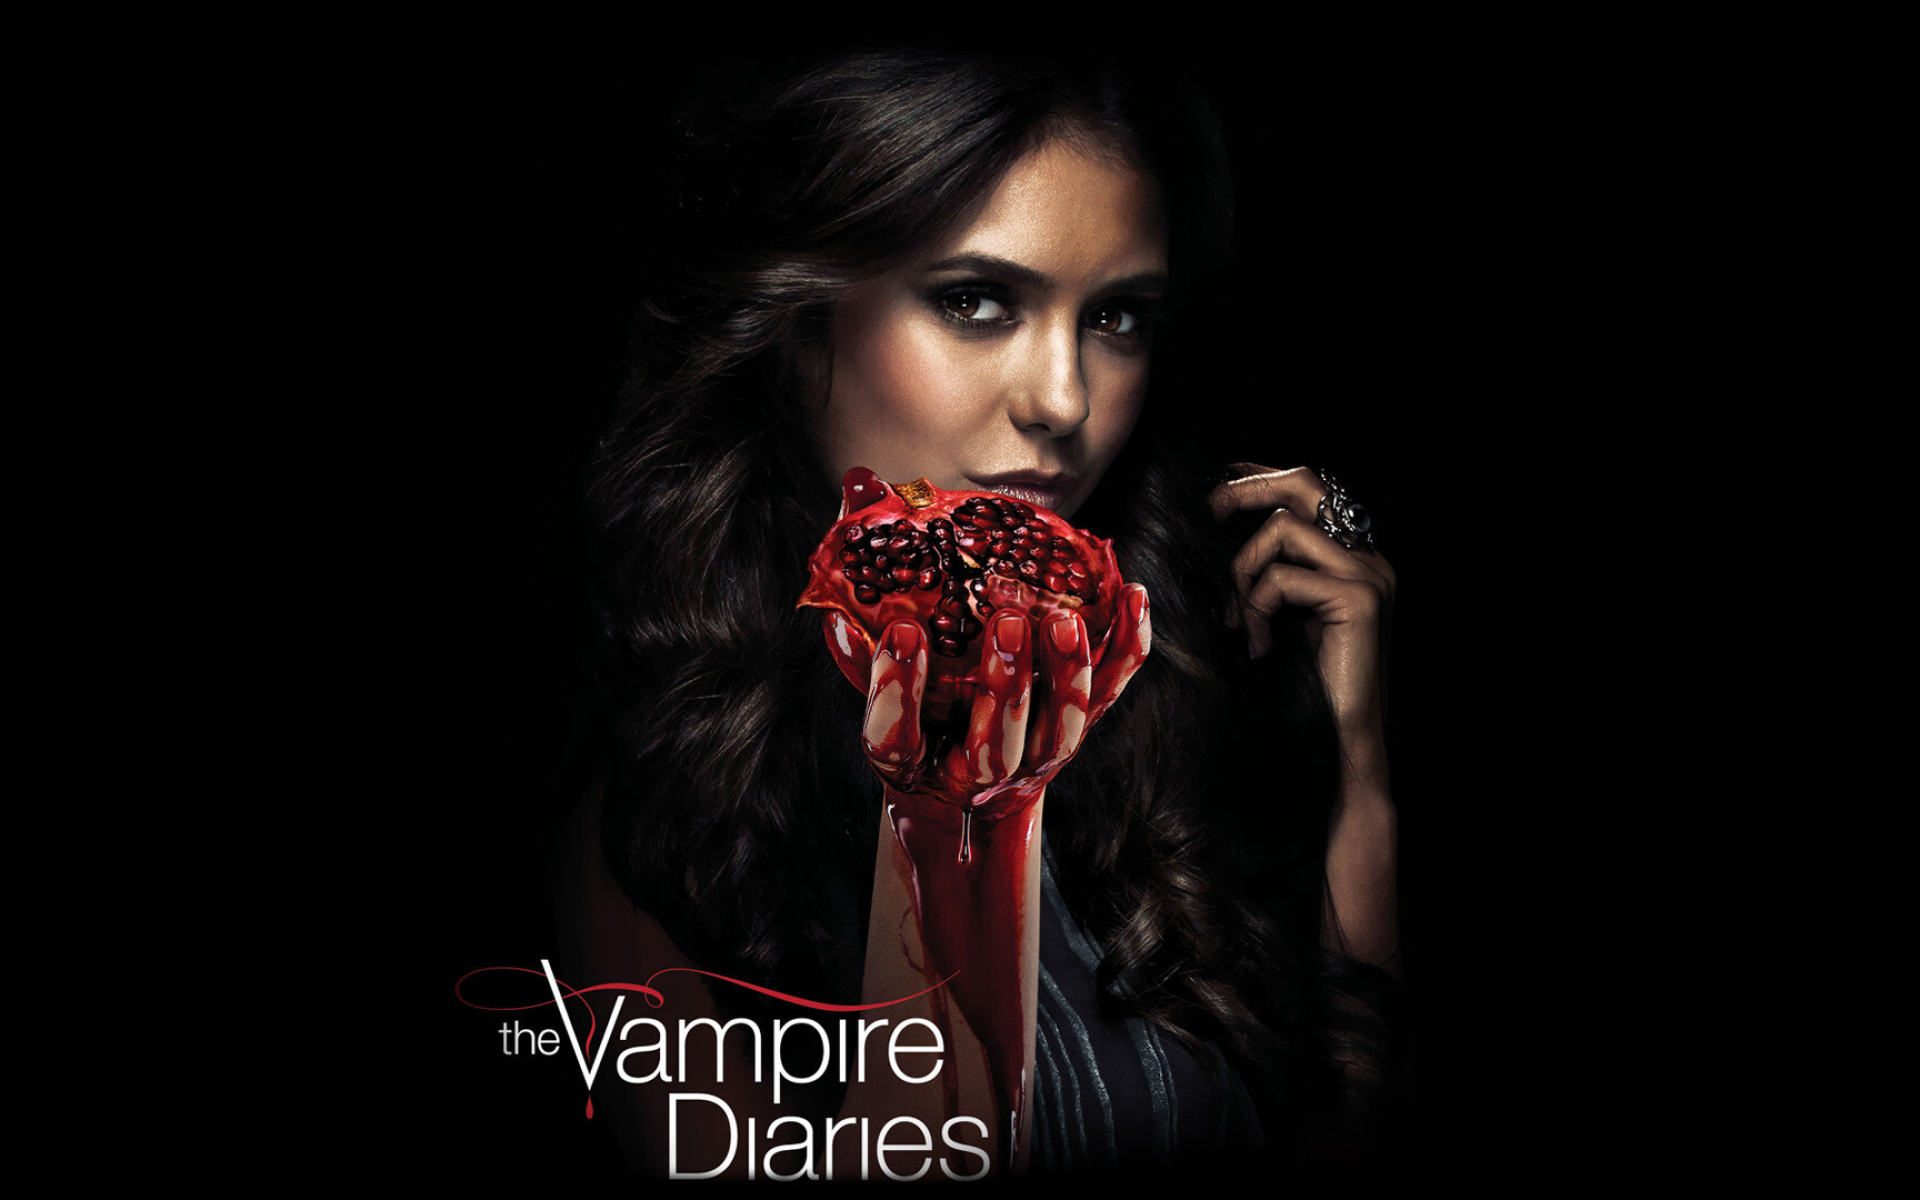 The Vampire Diaries (TV Series): Character Poster, Heart And Blood Look Like Pomegranate And Juice, Katherine Pierce. 1920x1200 HD Background.